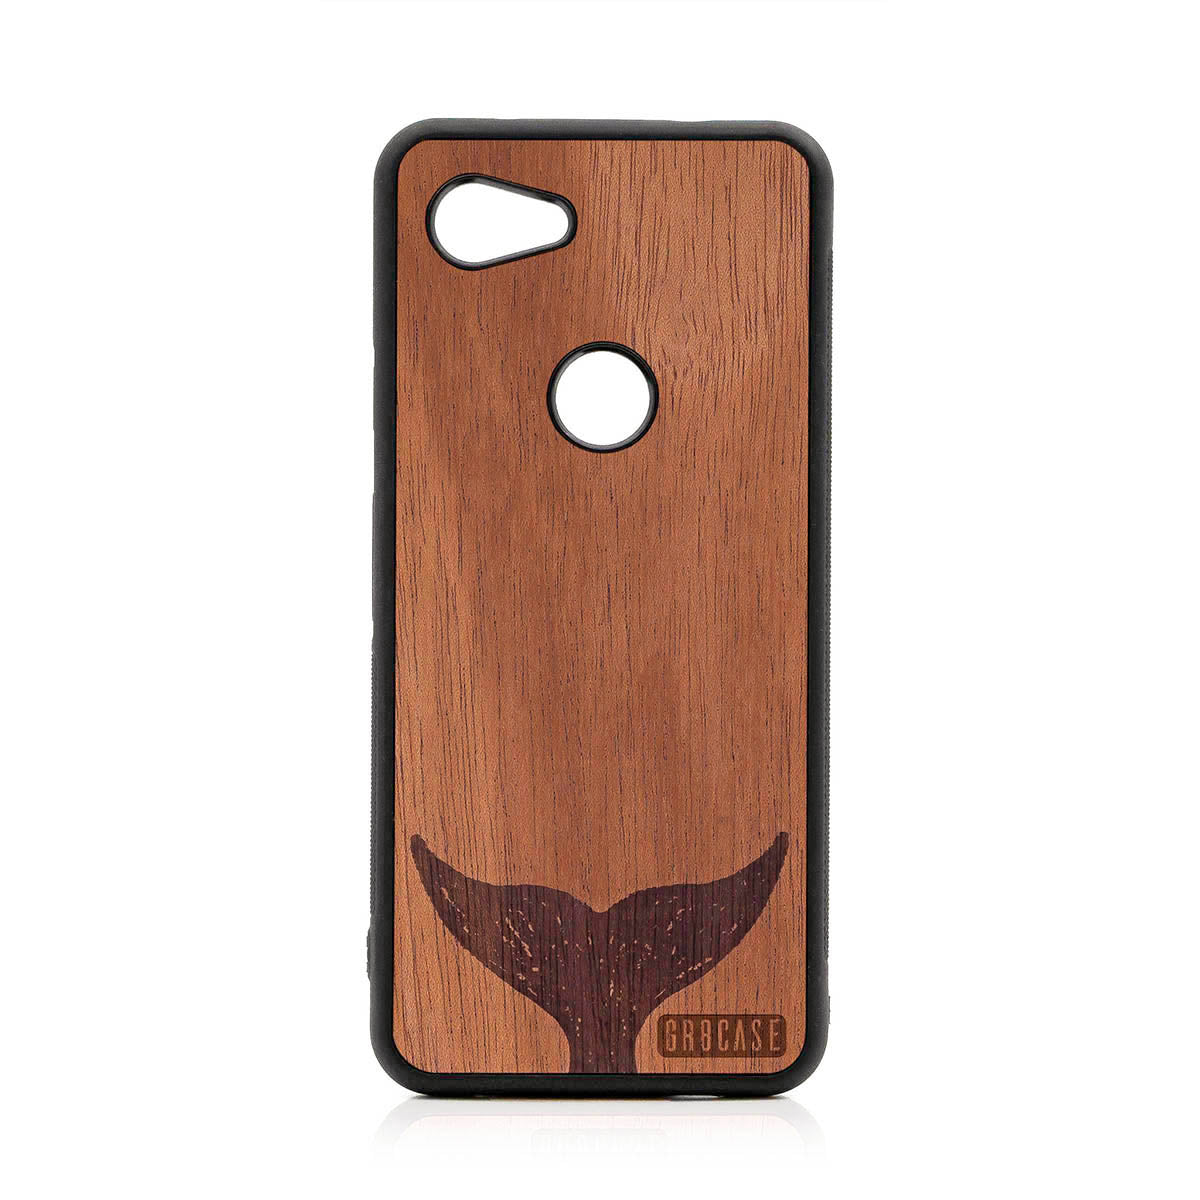 Whale Tail Design Wood Case For Google Pixel 3A XL